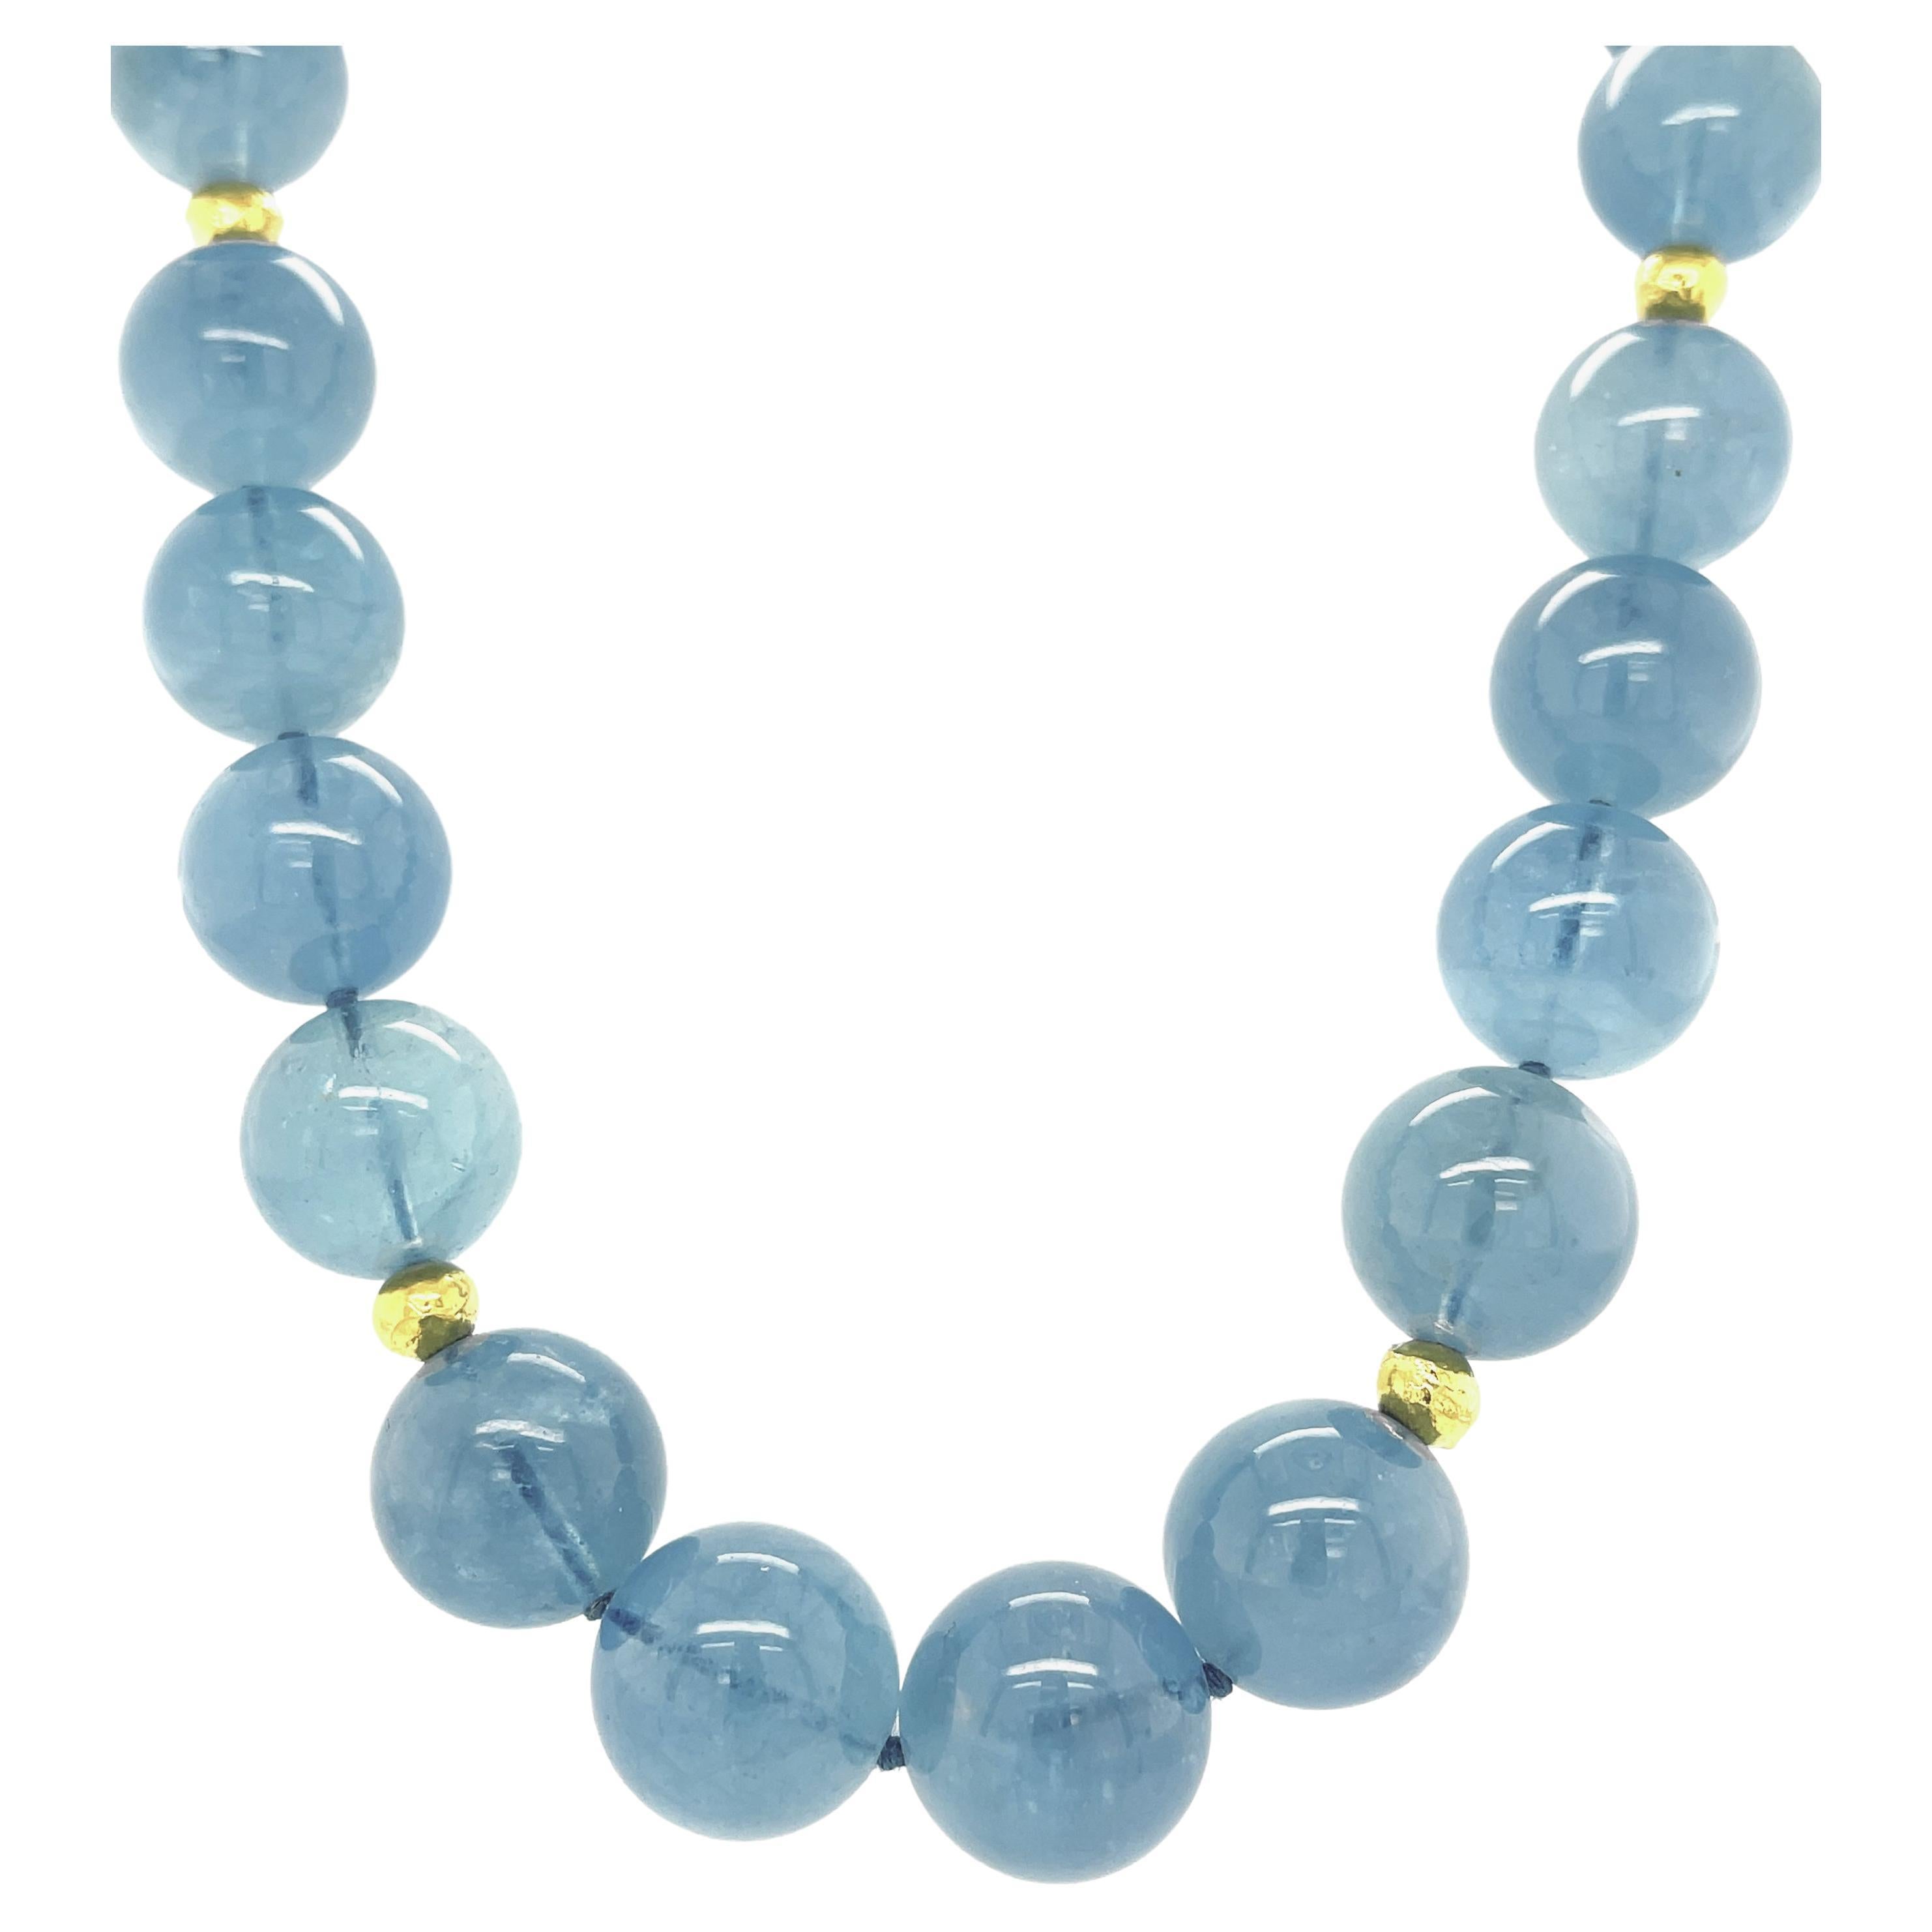 14 to 15mm Round Aquamarine Bead Necklace with Yellow Gold Accents, 18.5 Inches